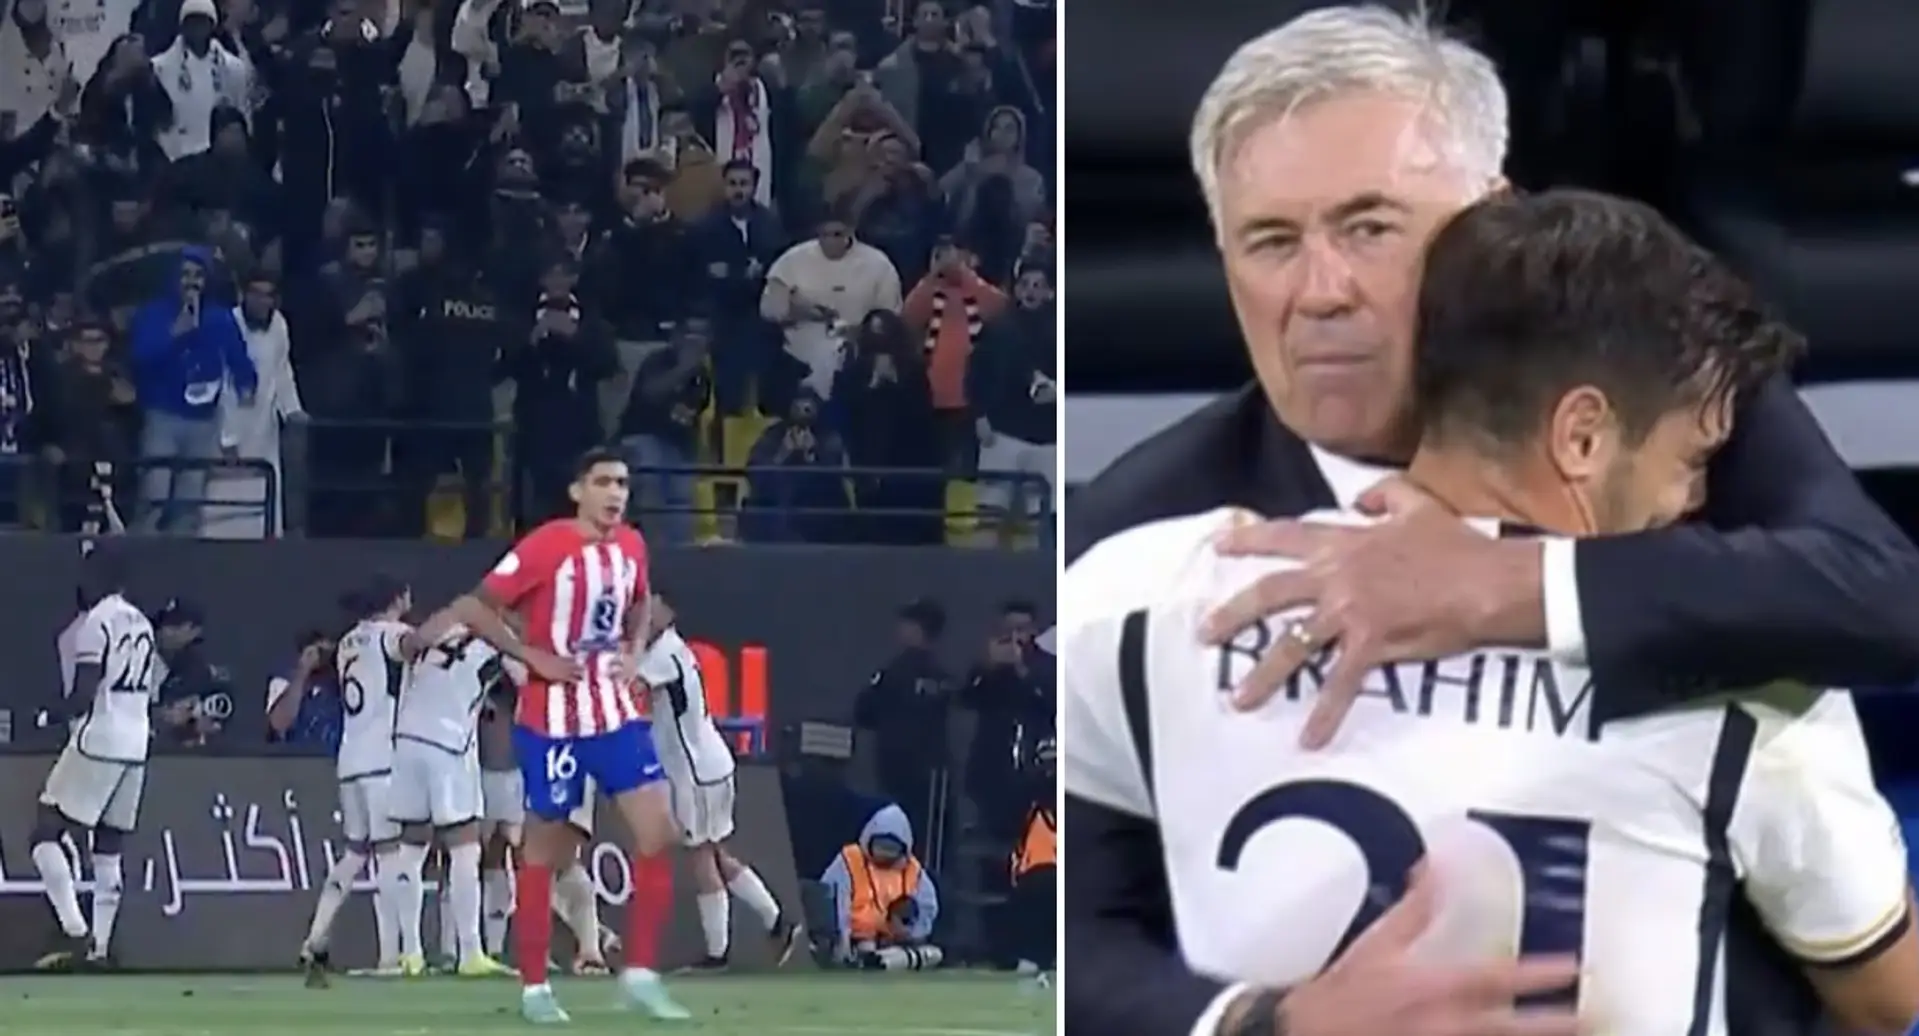 'This is Real Madrid':Ancelotti's speech before Supercopa remontada goes viral 